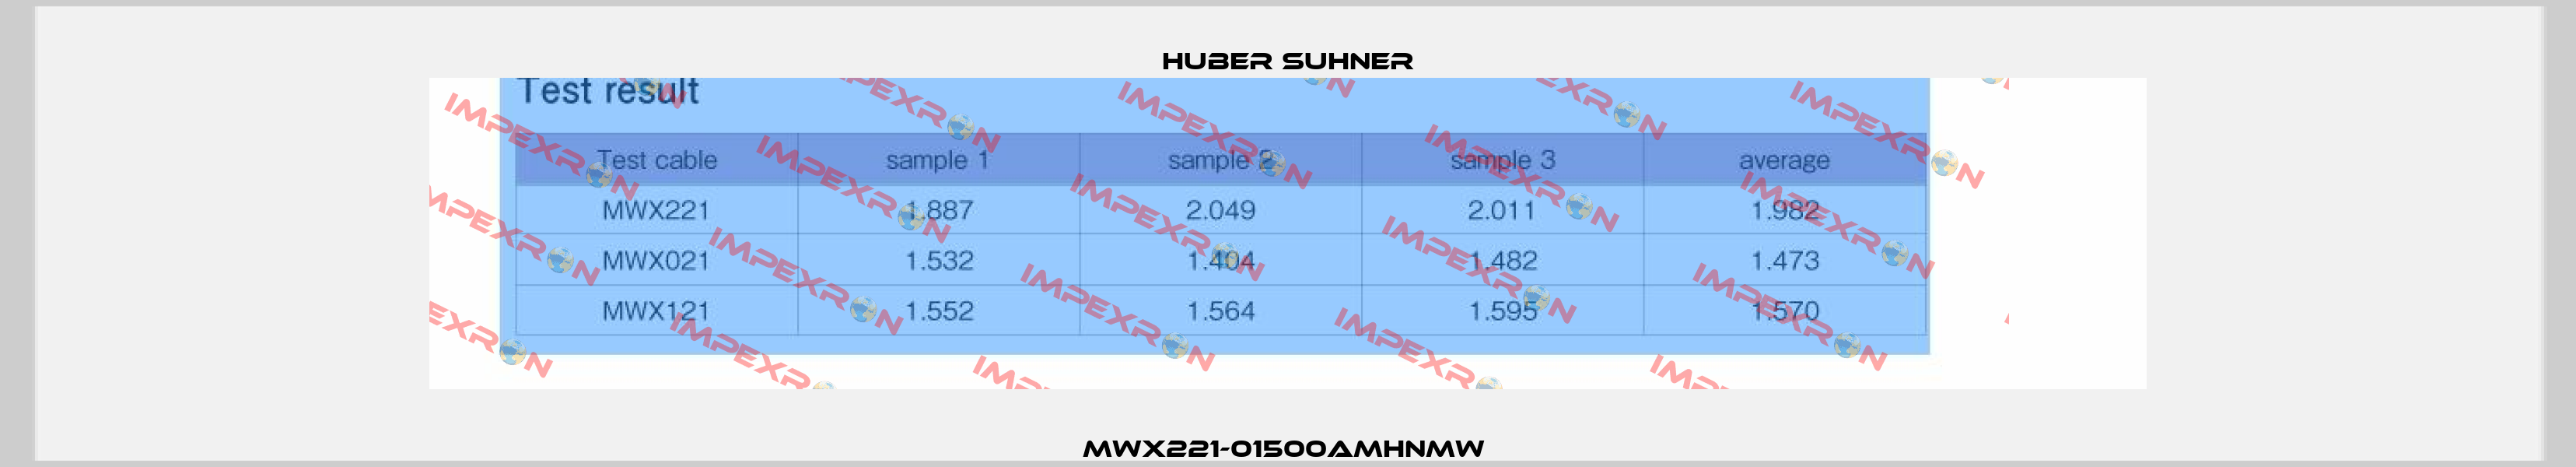 MWX221-01500AMHNMW  Huber Suhner